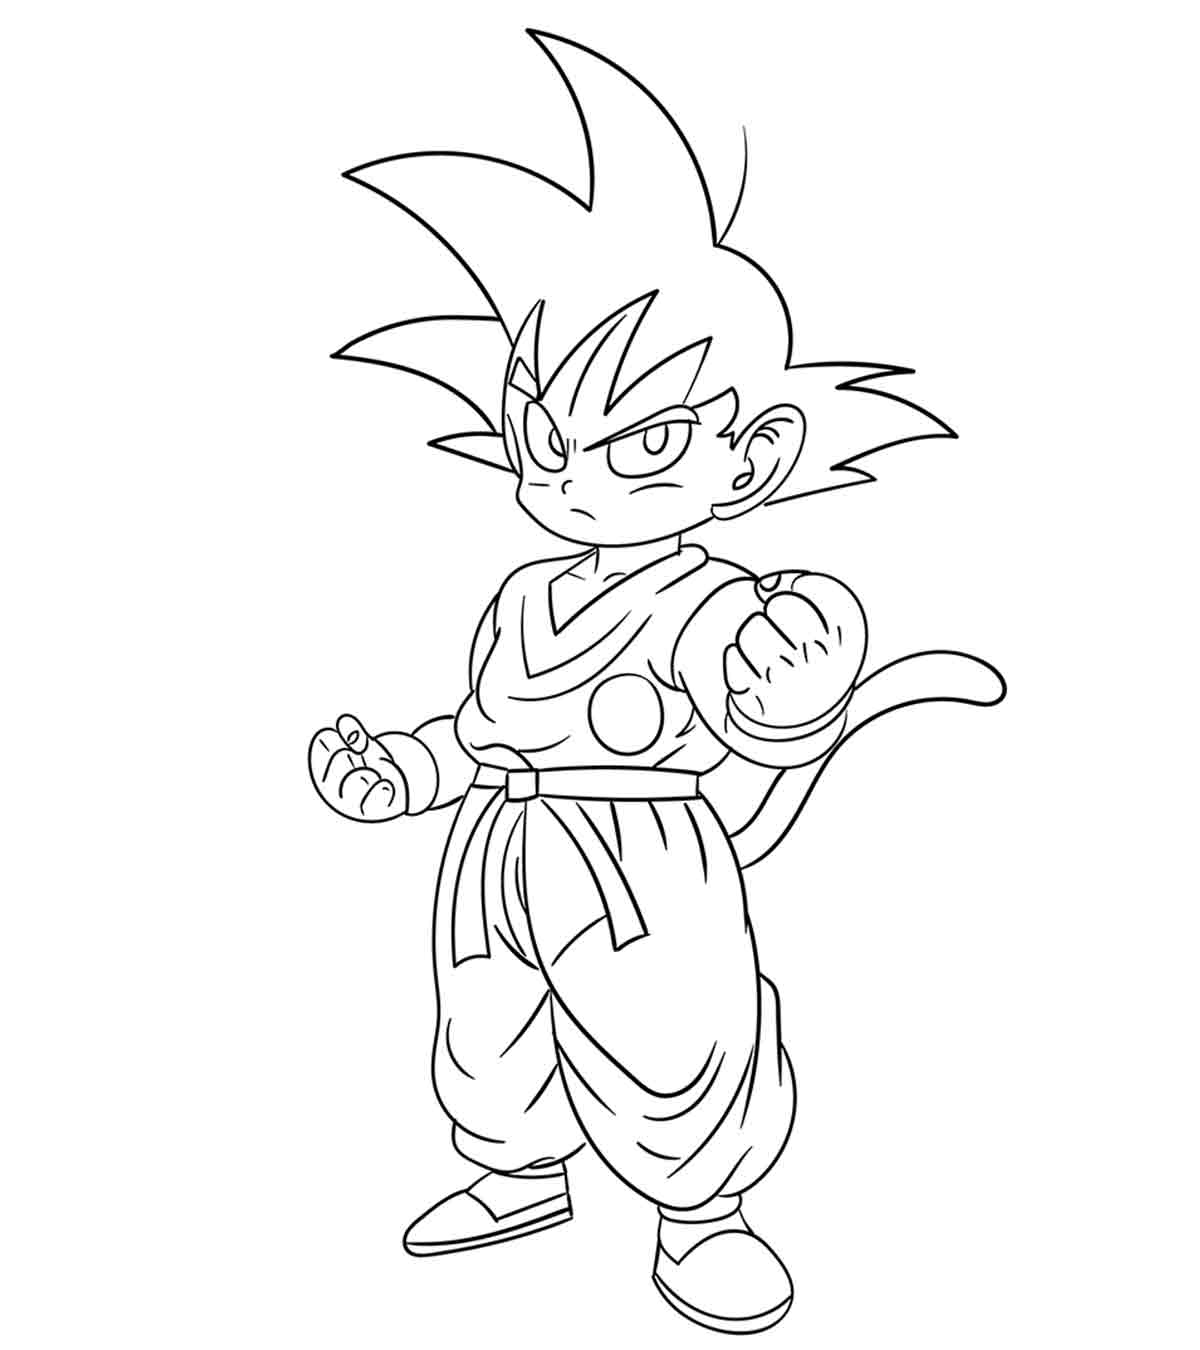 Dragon Ball Z Ultra Instinct Coloring Pages - Coloring and ...